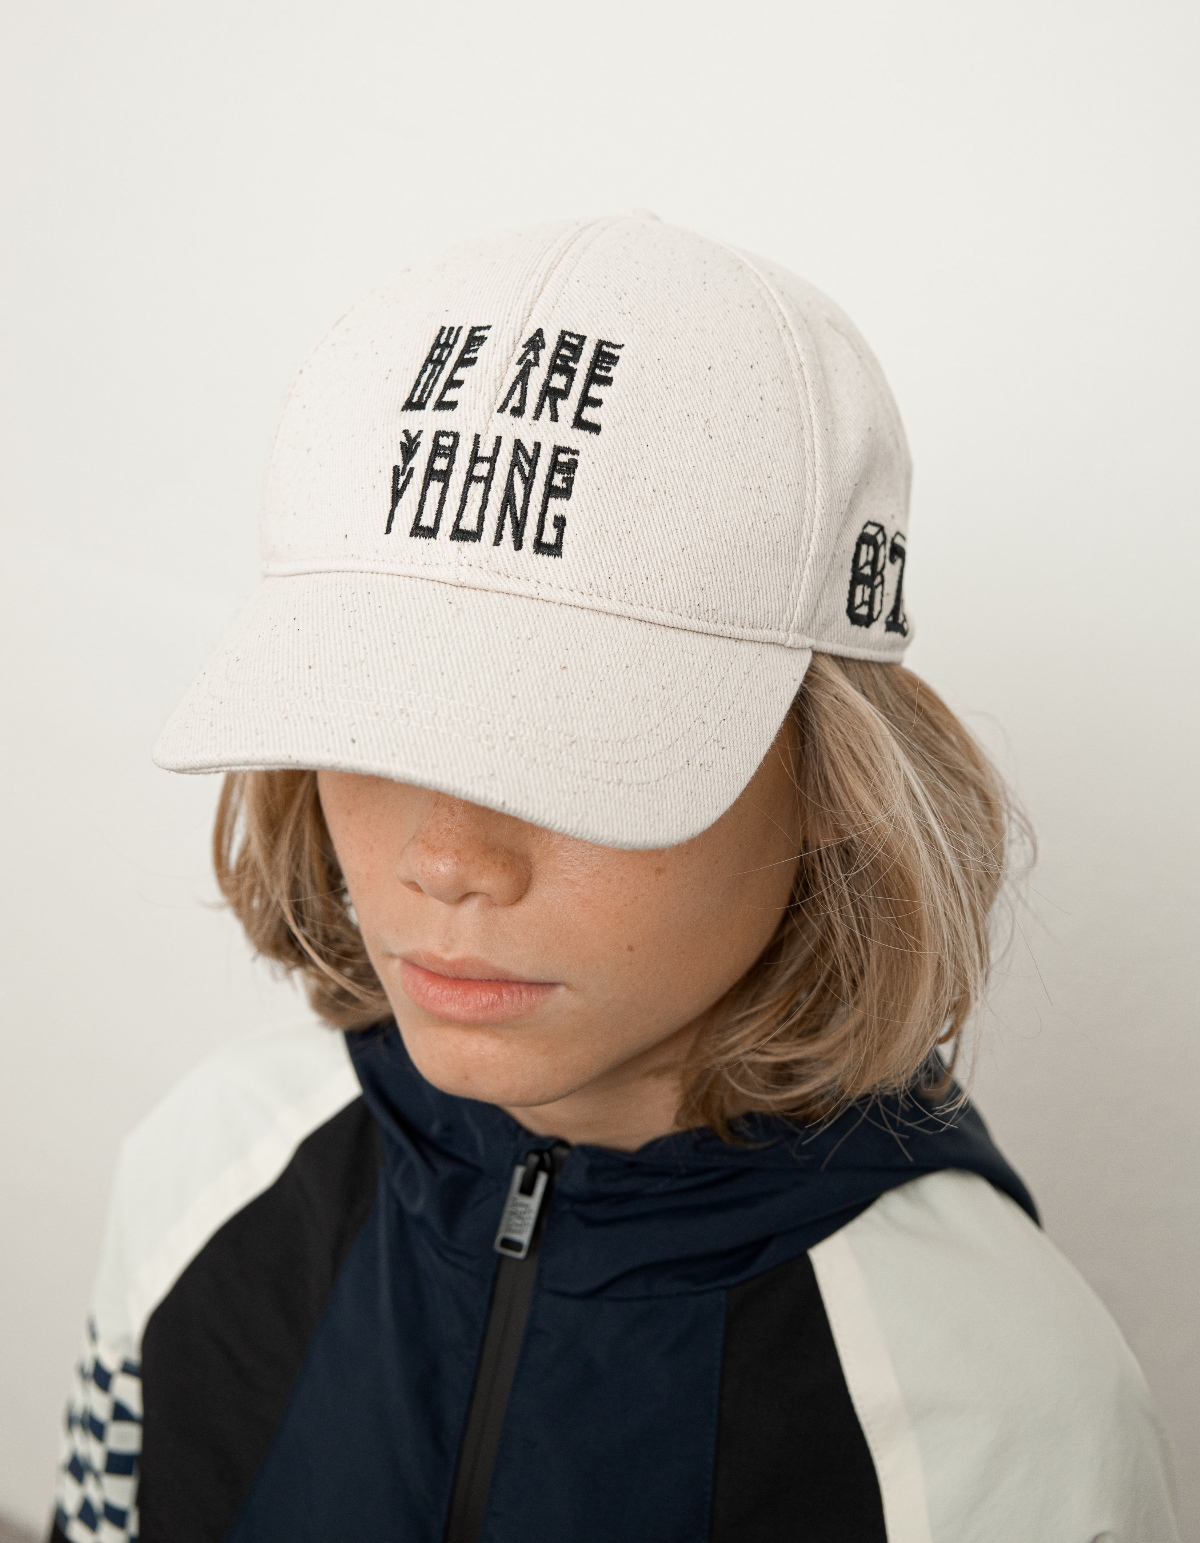 Boys’ beige cap with black embroidery